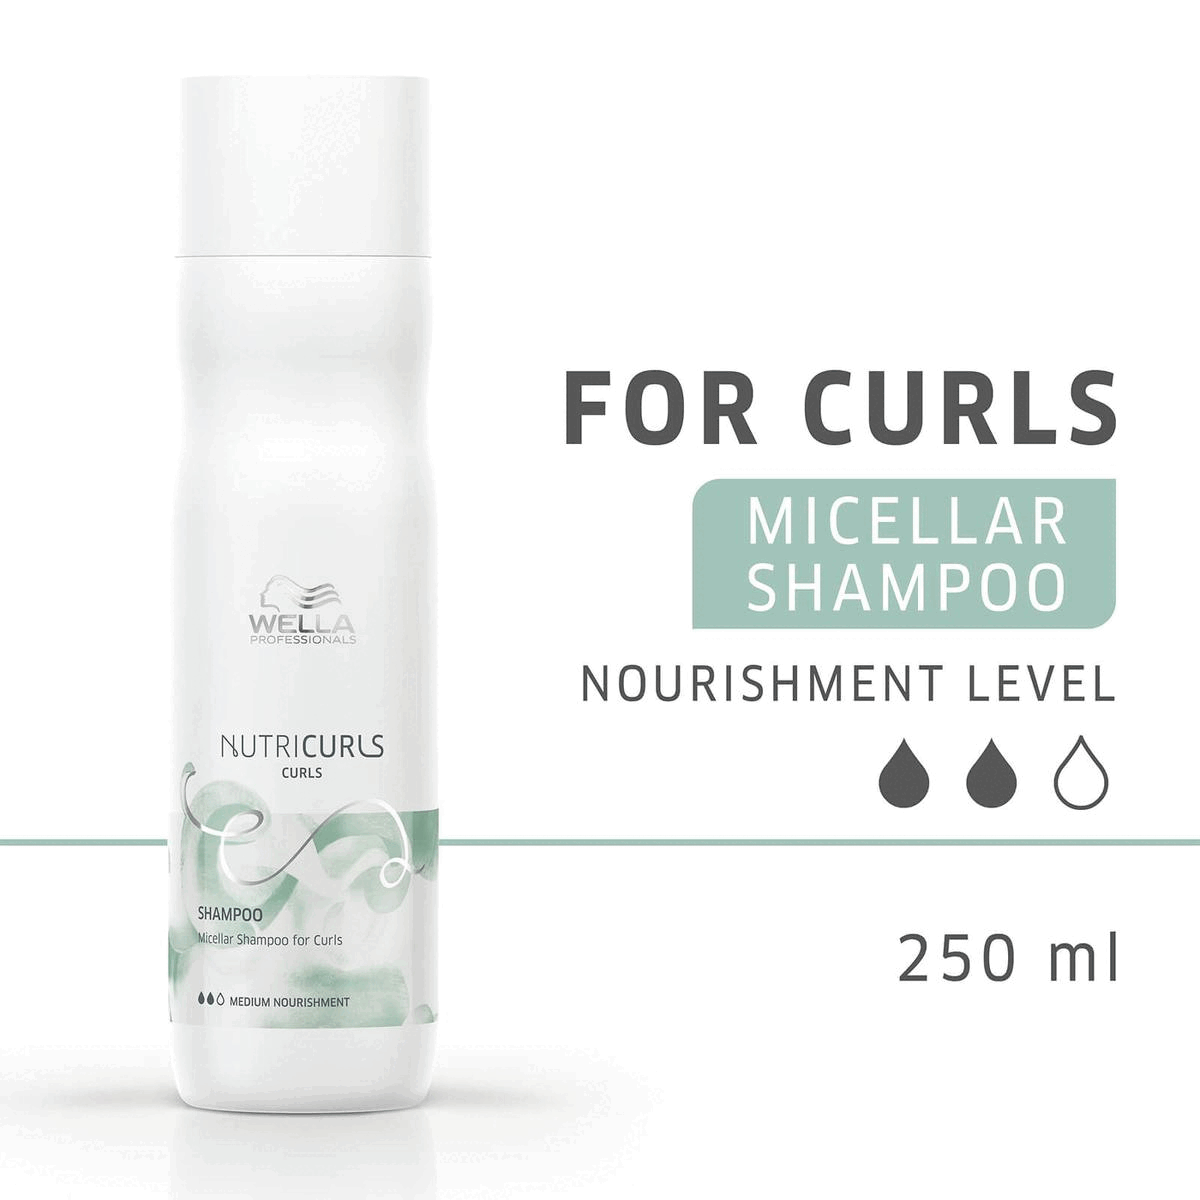 For curls micellar shampoo, gently removes impurities,nourishment level medium, nourish in complex,energizing fragrance,find the perfect partner
            